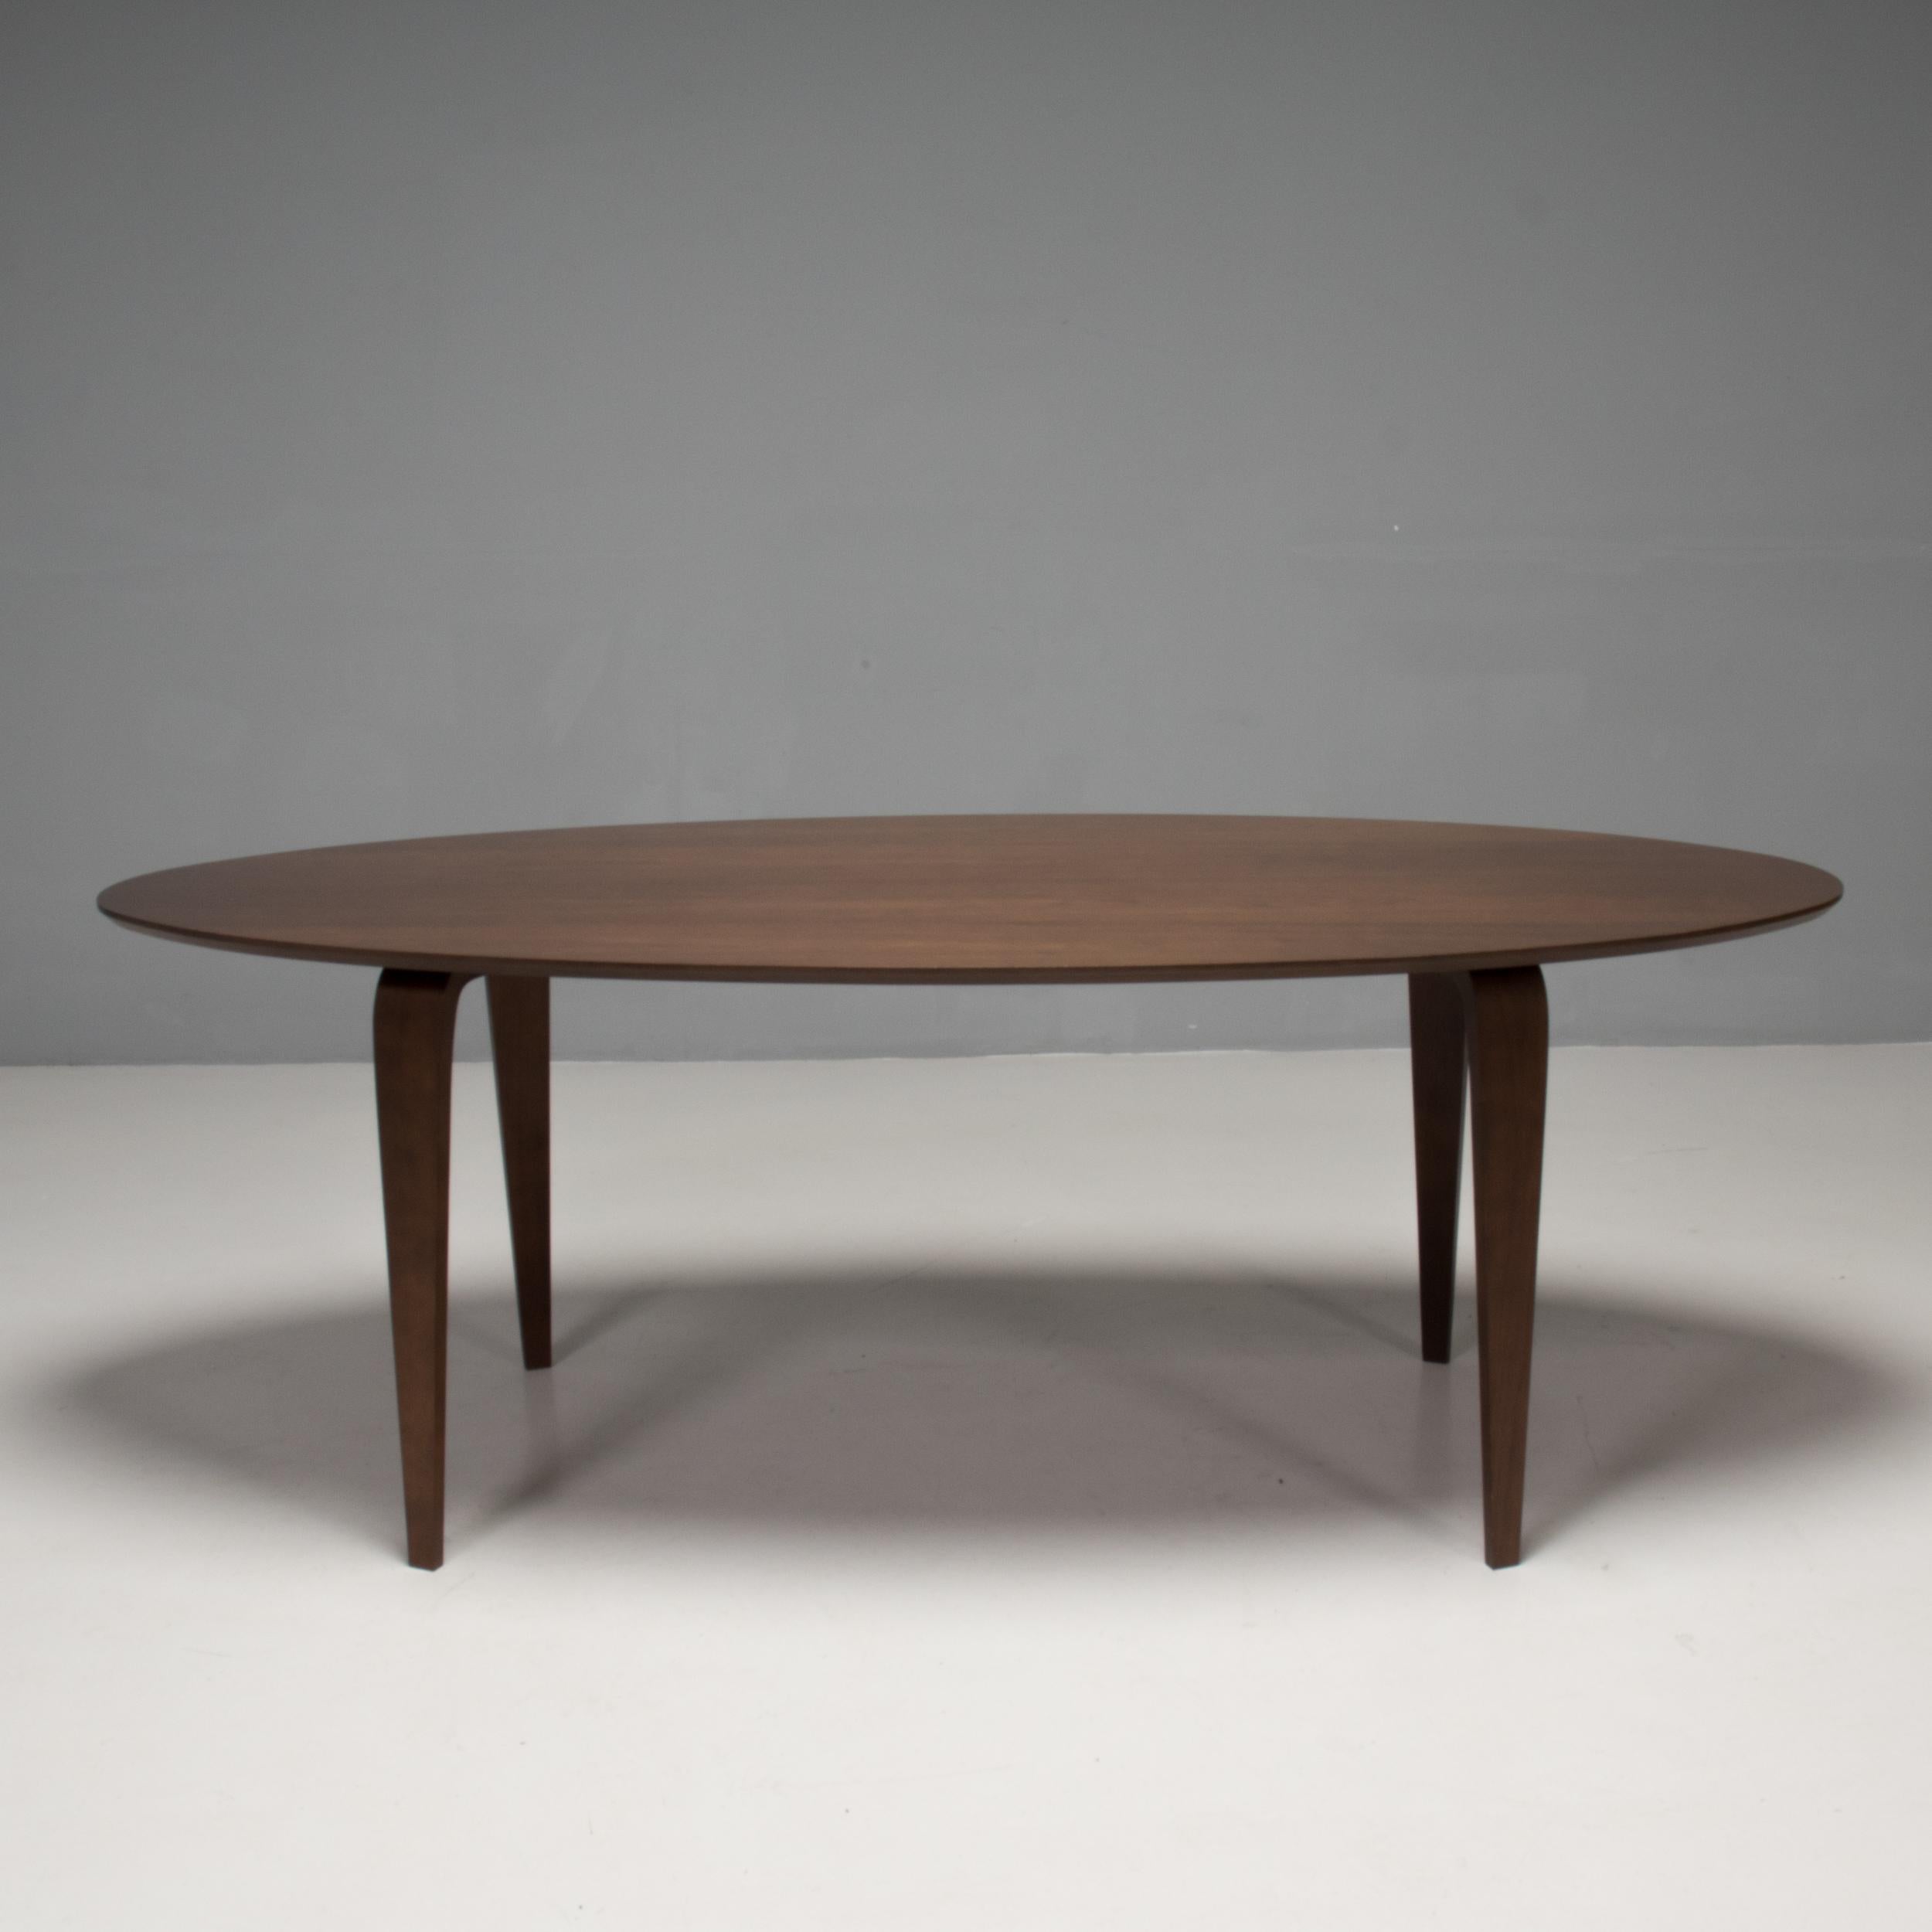 Originally designed by Benjamin Cherner in 2003, this Oval dining table was manufactured by the Cherner company in 2013.

Inspired by the curves of the original Cherner chair, this dining table is constructed from moulded plywood with a walnut